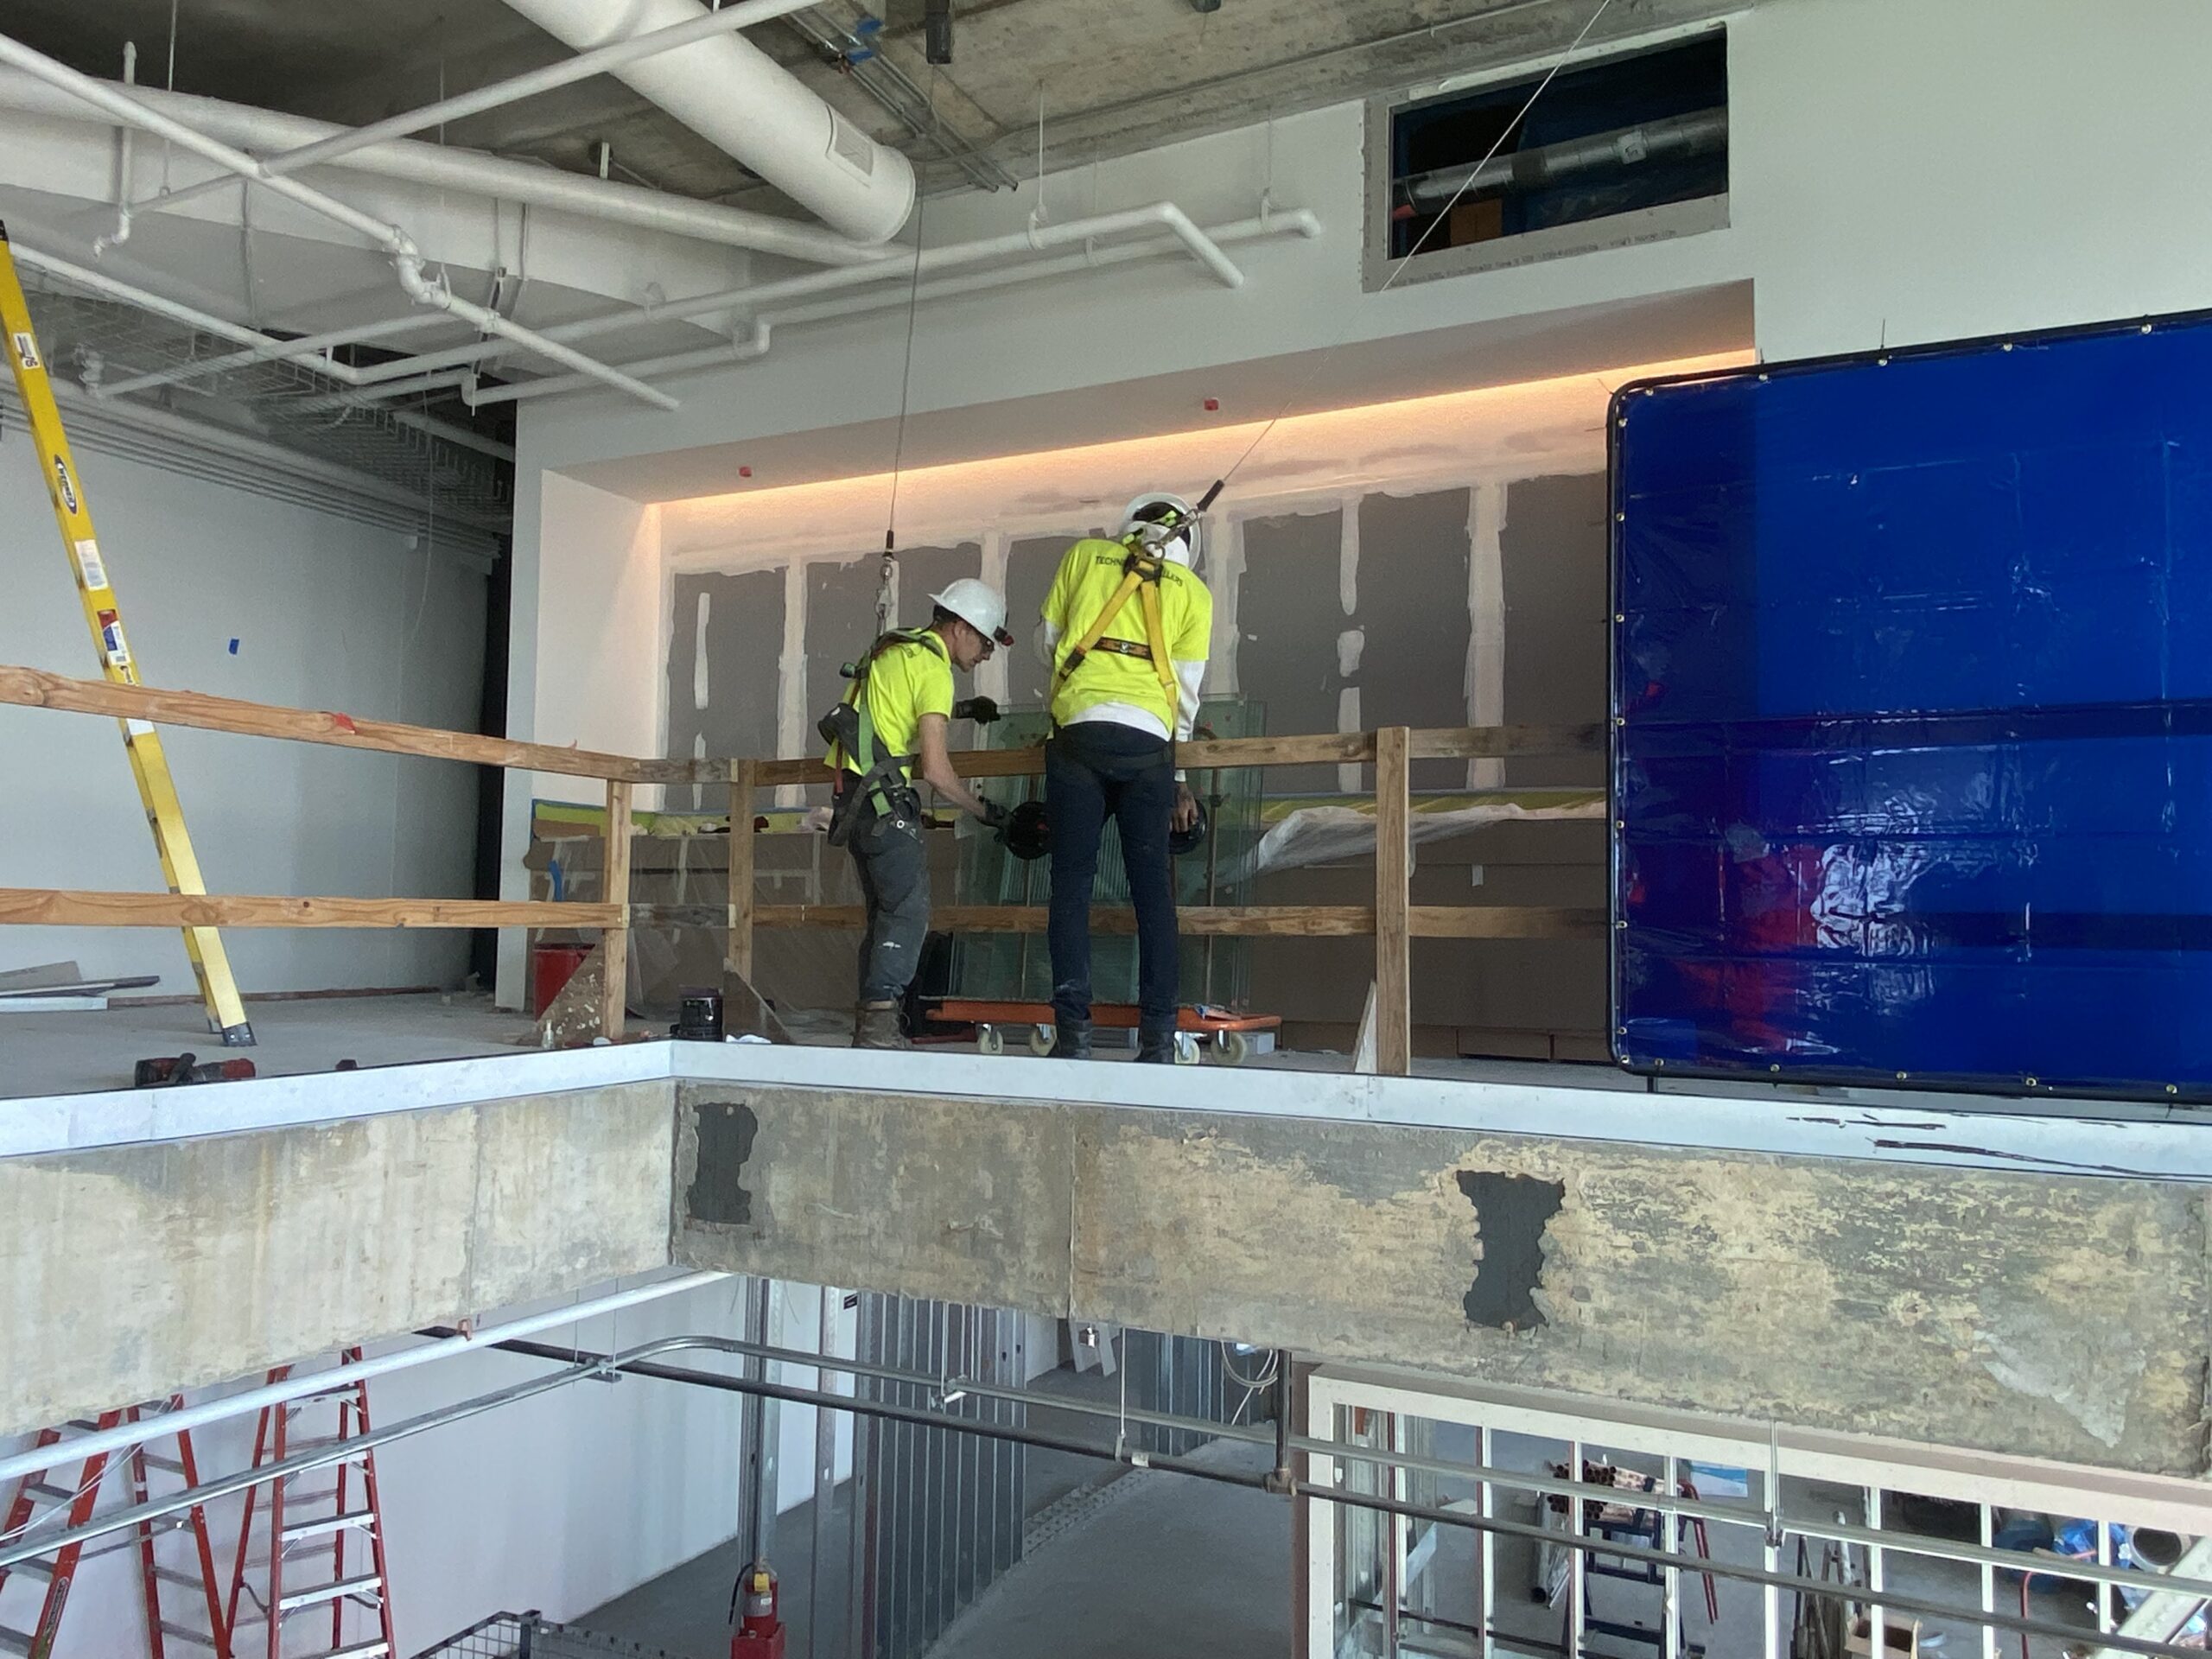 workers properly using PFAS (personal fall arrest system) to install perimeter glass panels